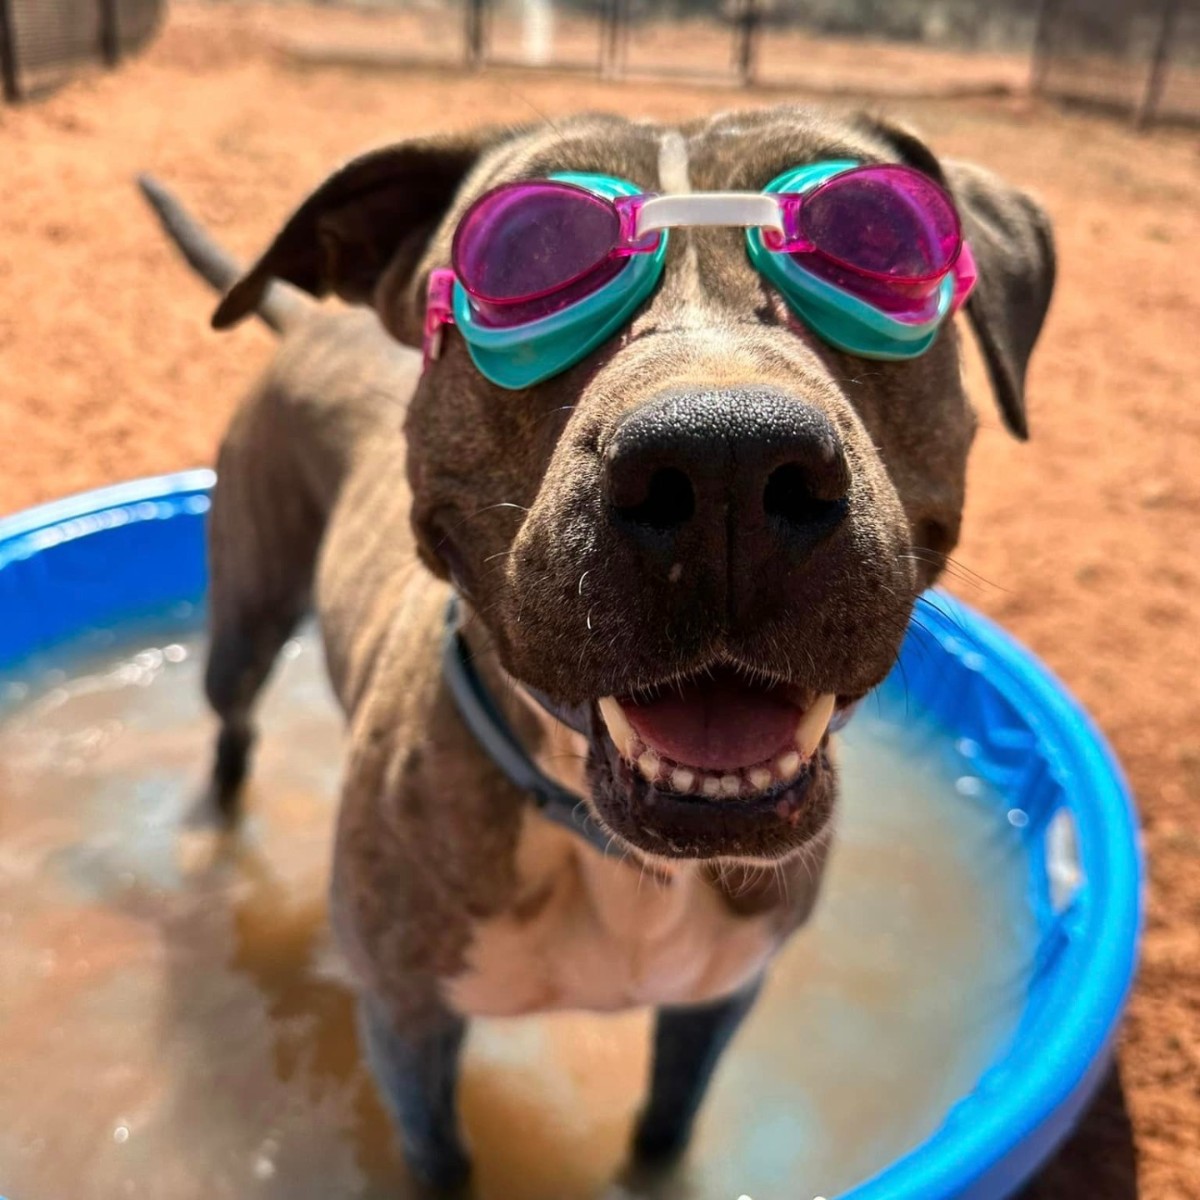 Pool day for the Sanctuary dogs! 🌊🐾

We will always appreciate how our team goes above and beyond to provide for pets in our care 🧡

📸: Anabel, Lifesaving & Care Specialist in Dogtown! 

#SaveThemAll #NoKill2025